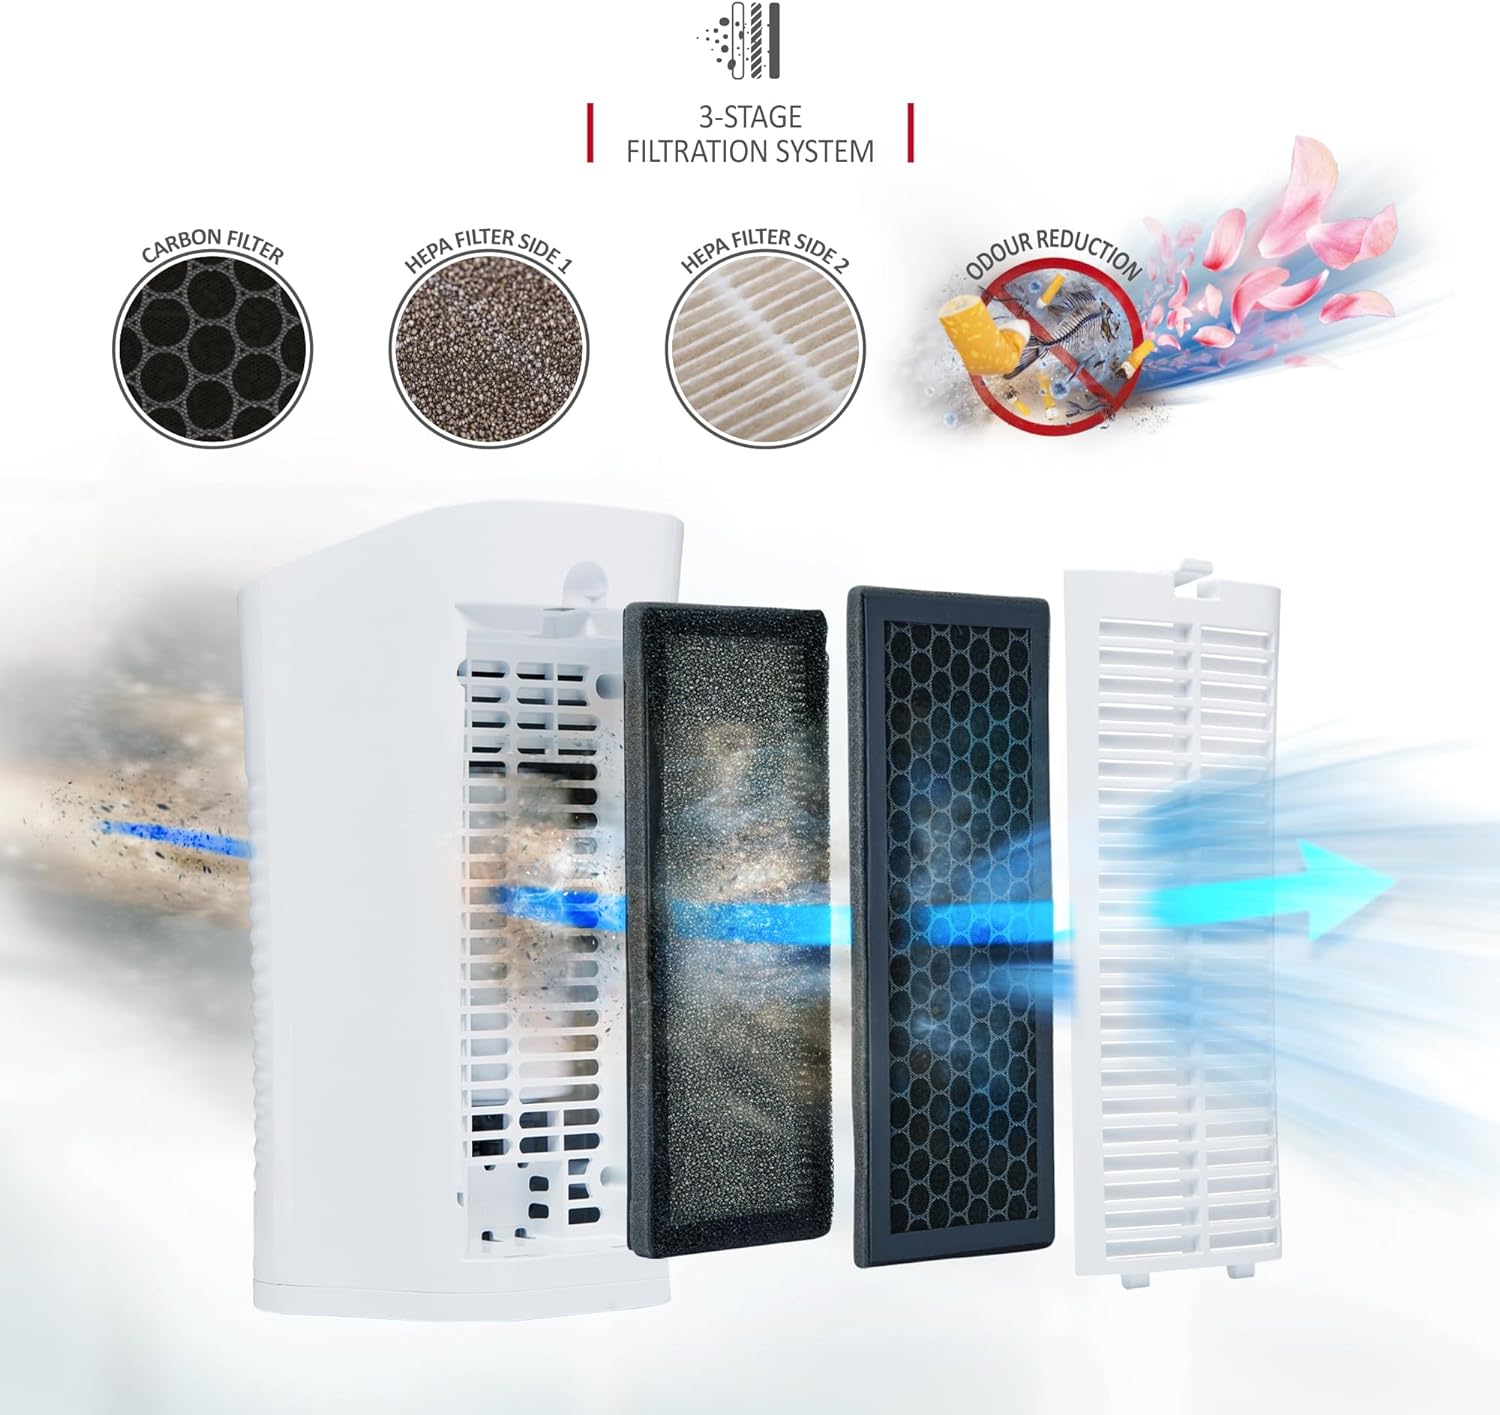 NETTA Air Purifier with Extra Spare filter for Allergies with True HEPA & Active Carbon Filters, 3 - Stage Filtration System, 3 Fan Speed Modes, Ionizer, 28W, CADR 50 m³/h - Sleep Mode and 8 Hour Timer - Amazing Gadgets Outlet